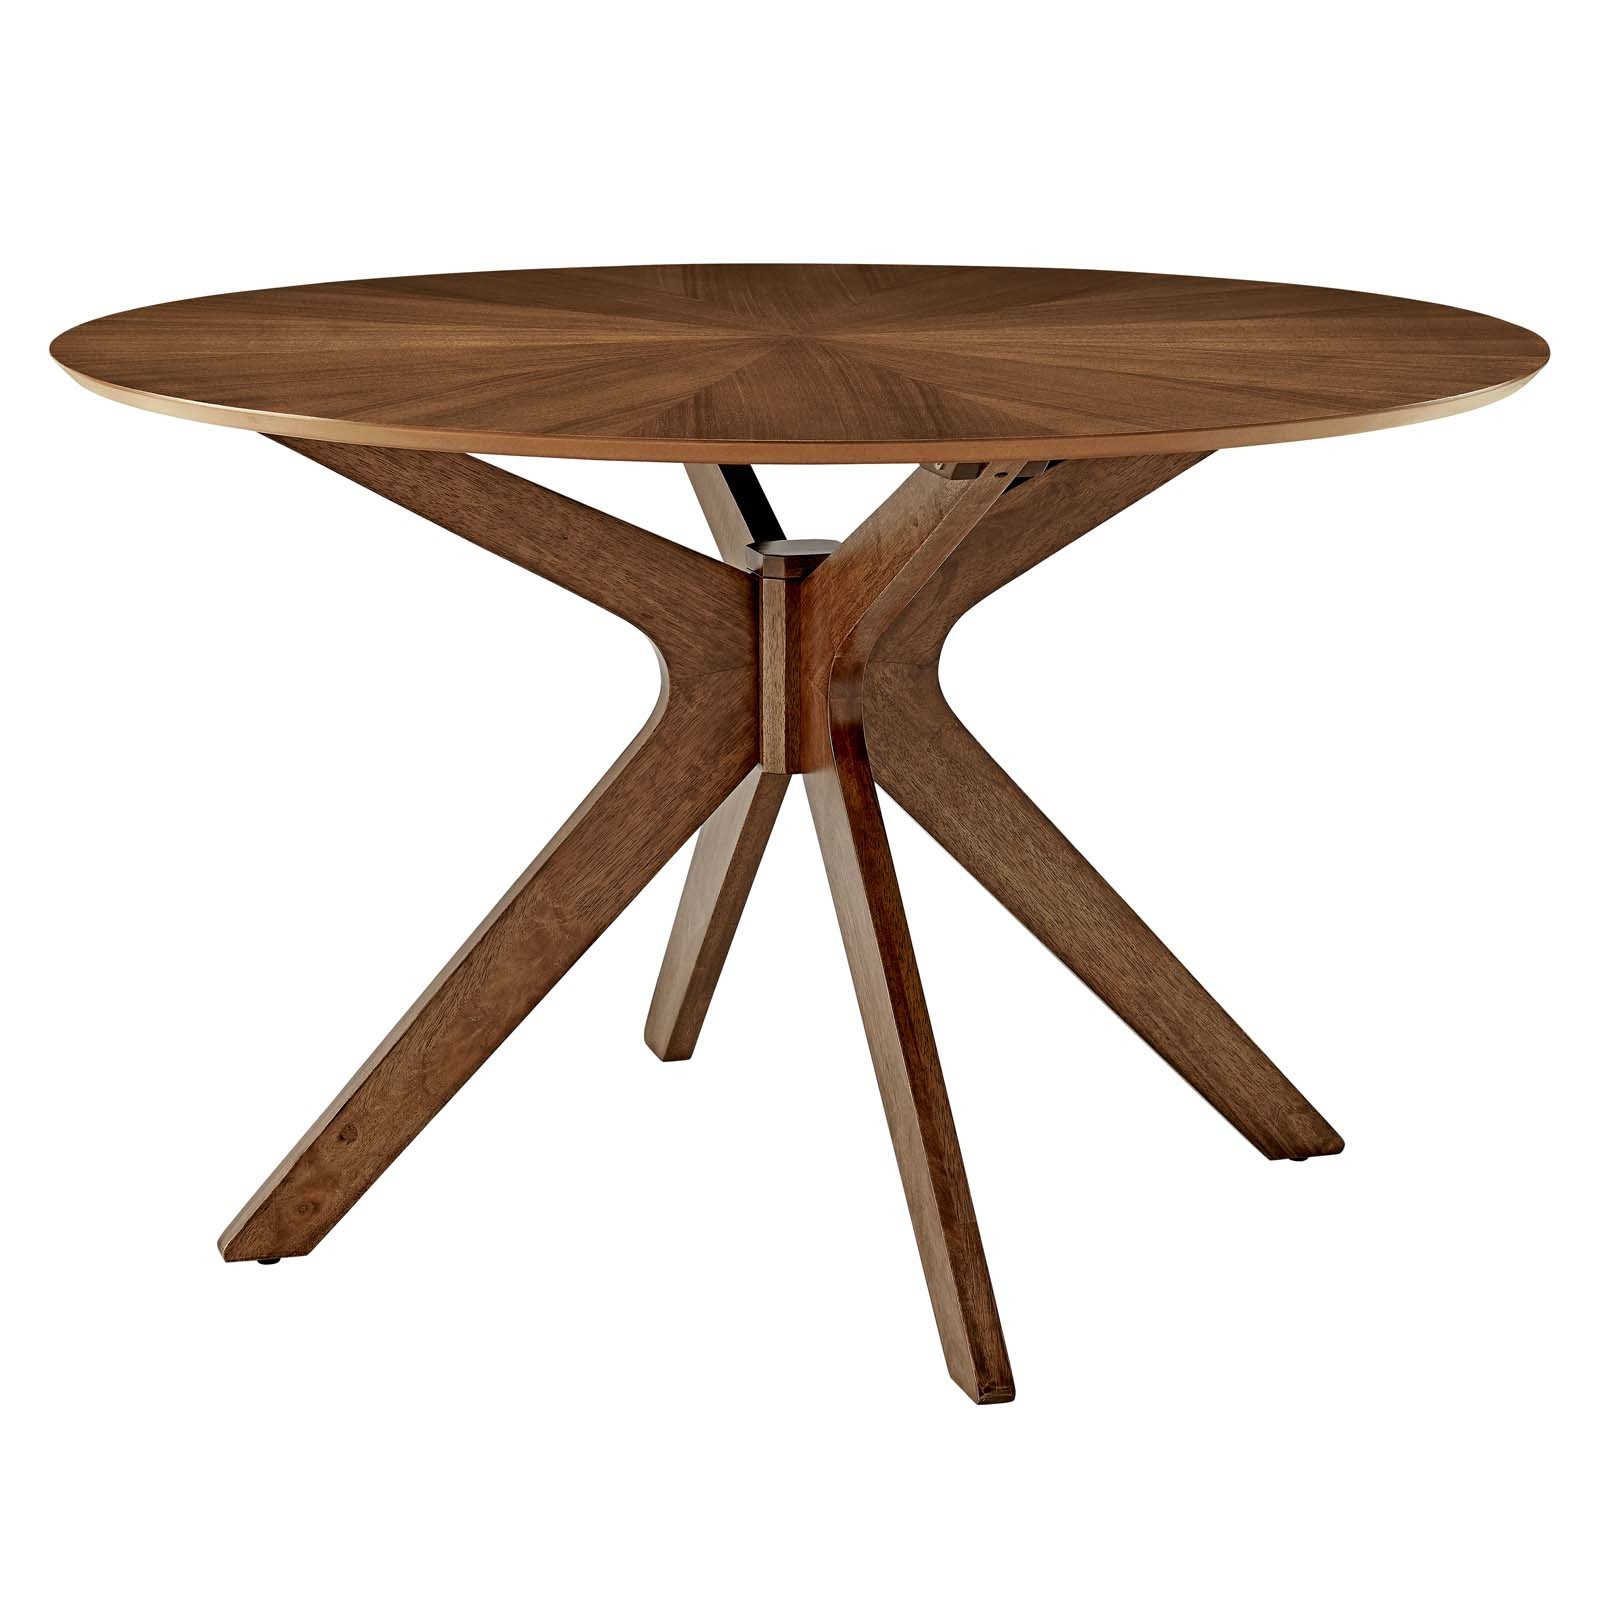 Crossroads 47 Inch Round Wood Dining Table in Walnut